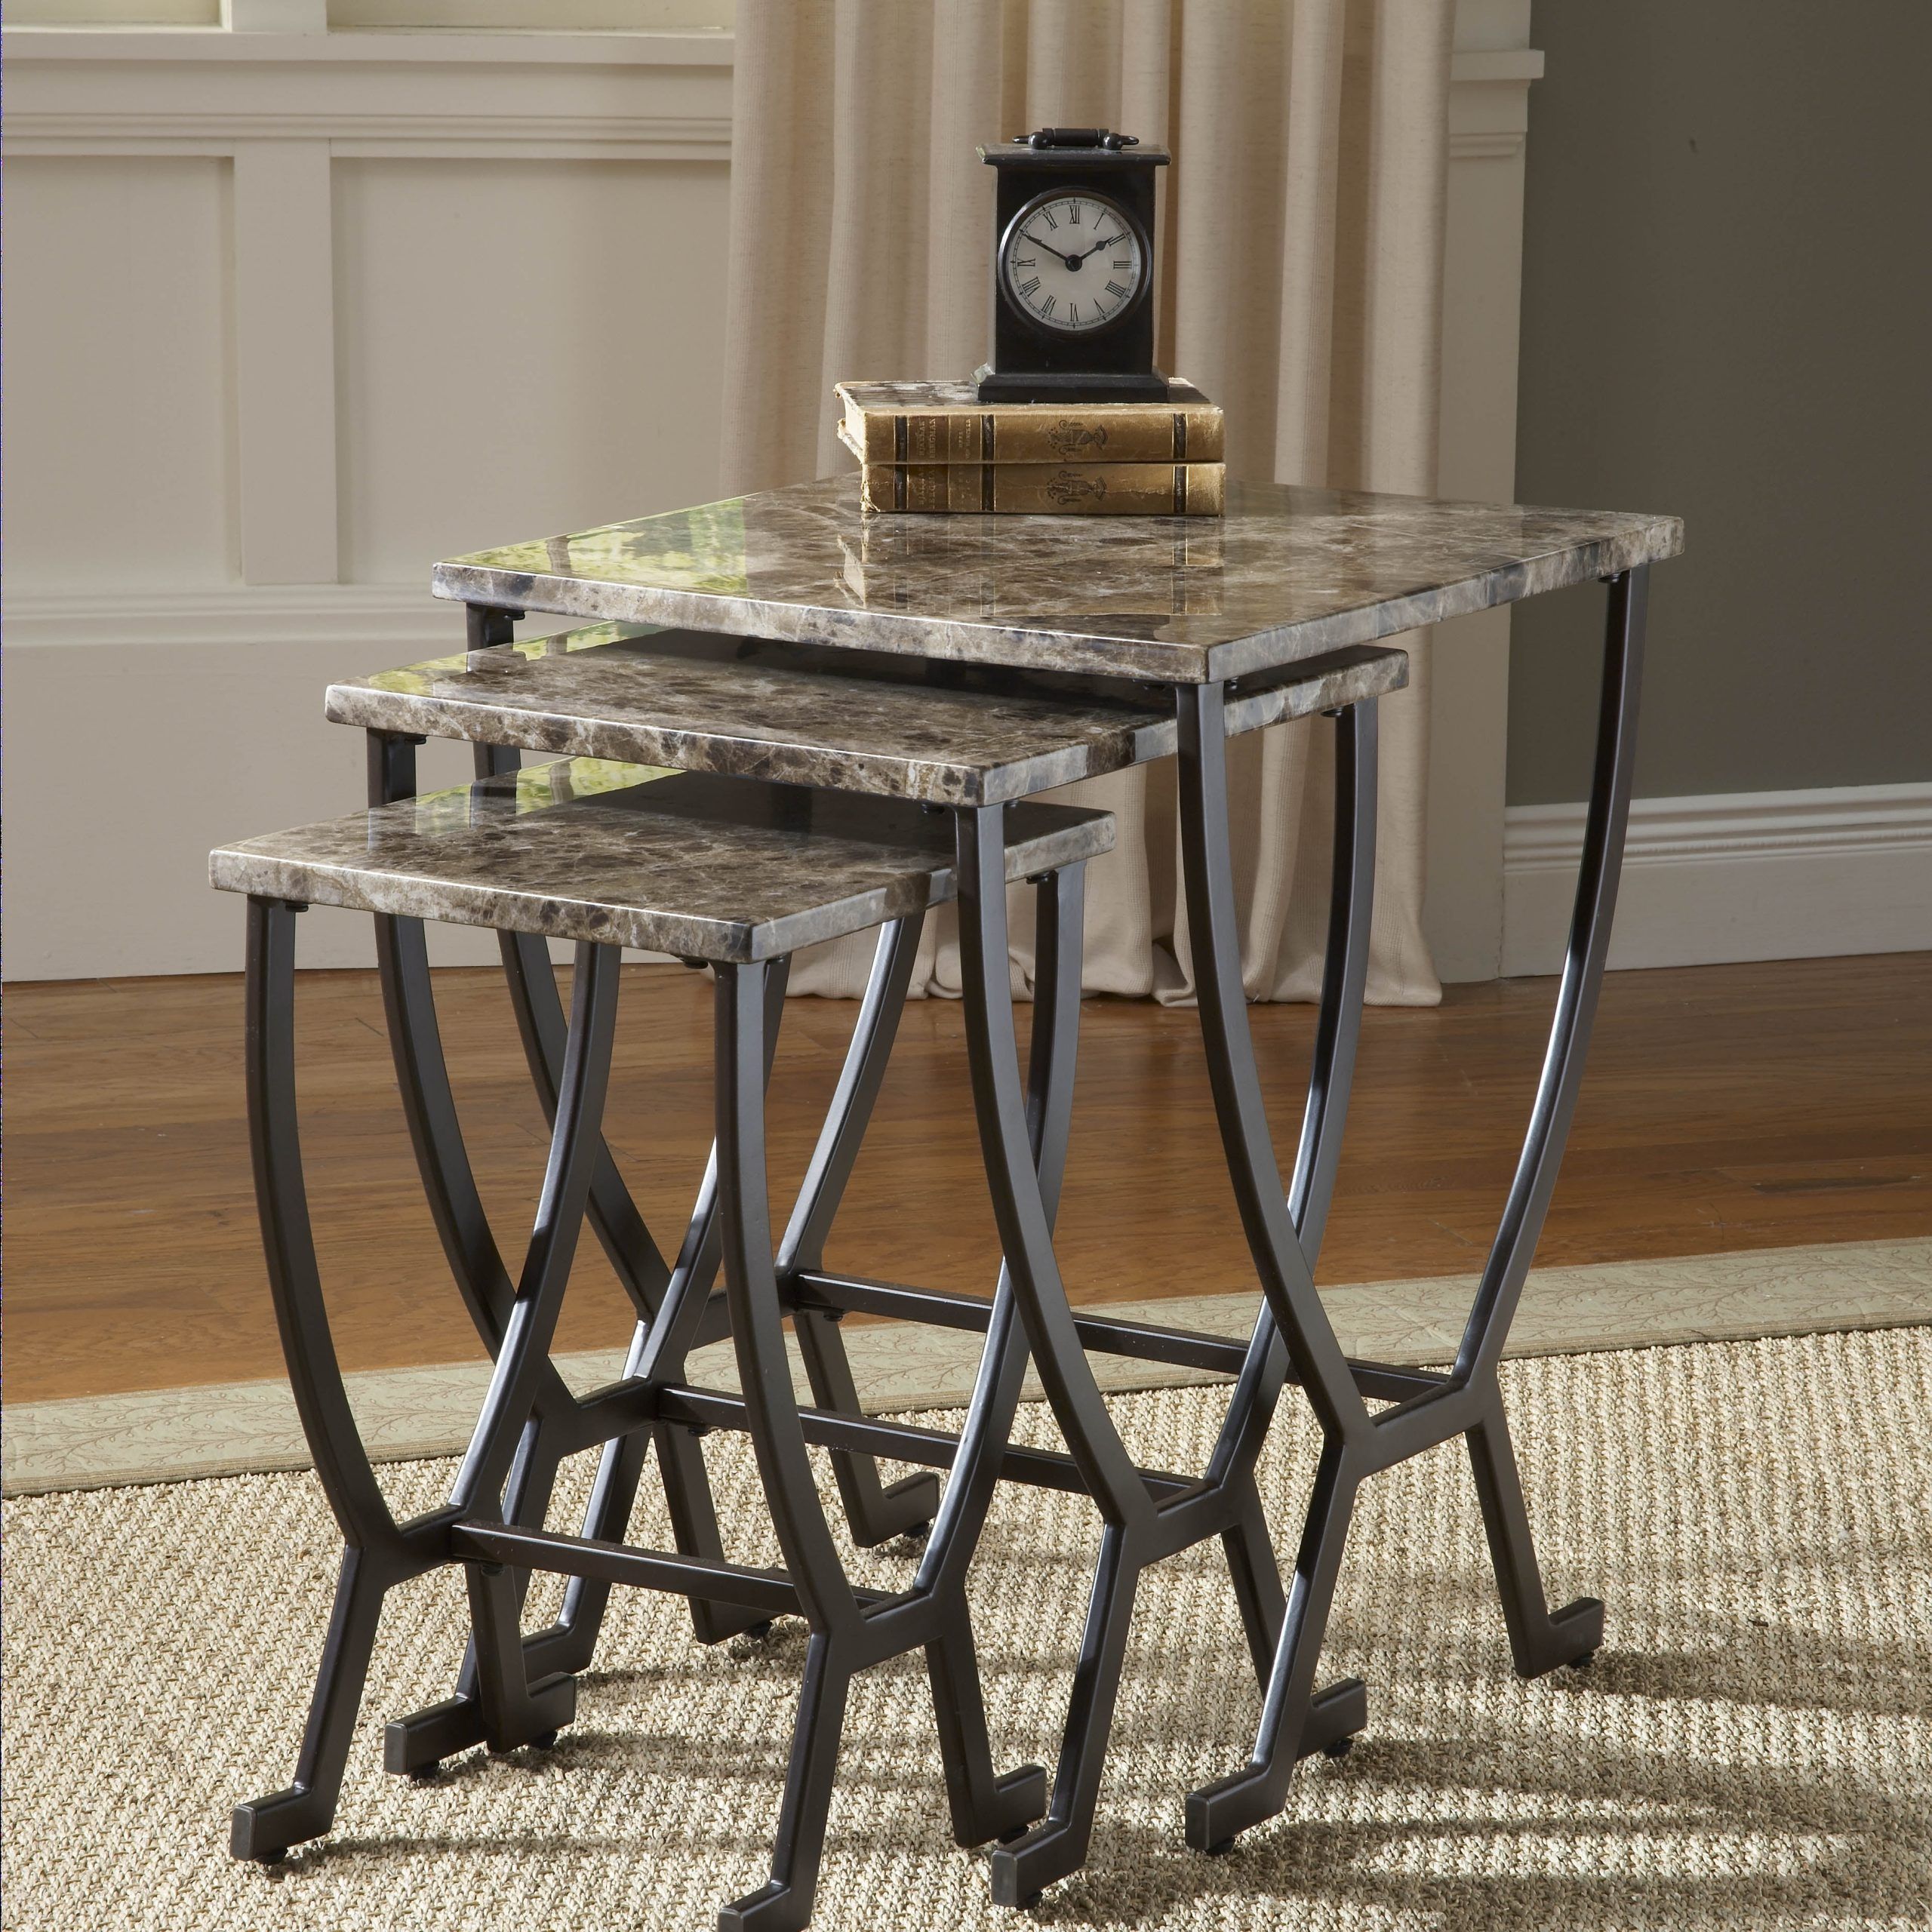 Hillsdale Furniture Monaco Faux Marble Top Nesting Tables, Espresso Throughout Monaco Round Coffee Tables (View 17 of 20)